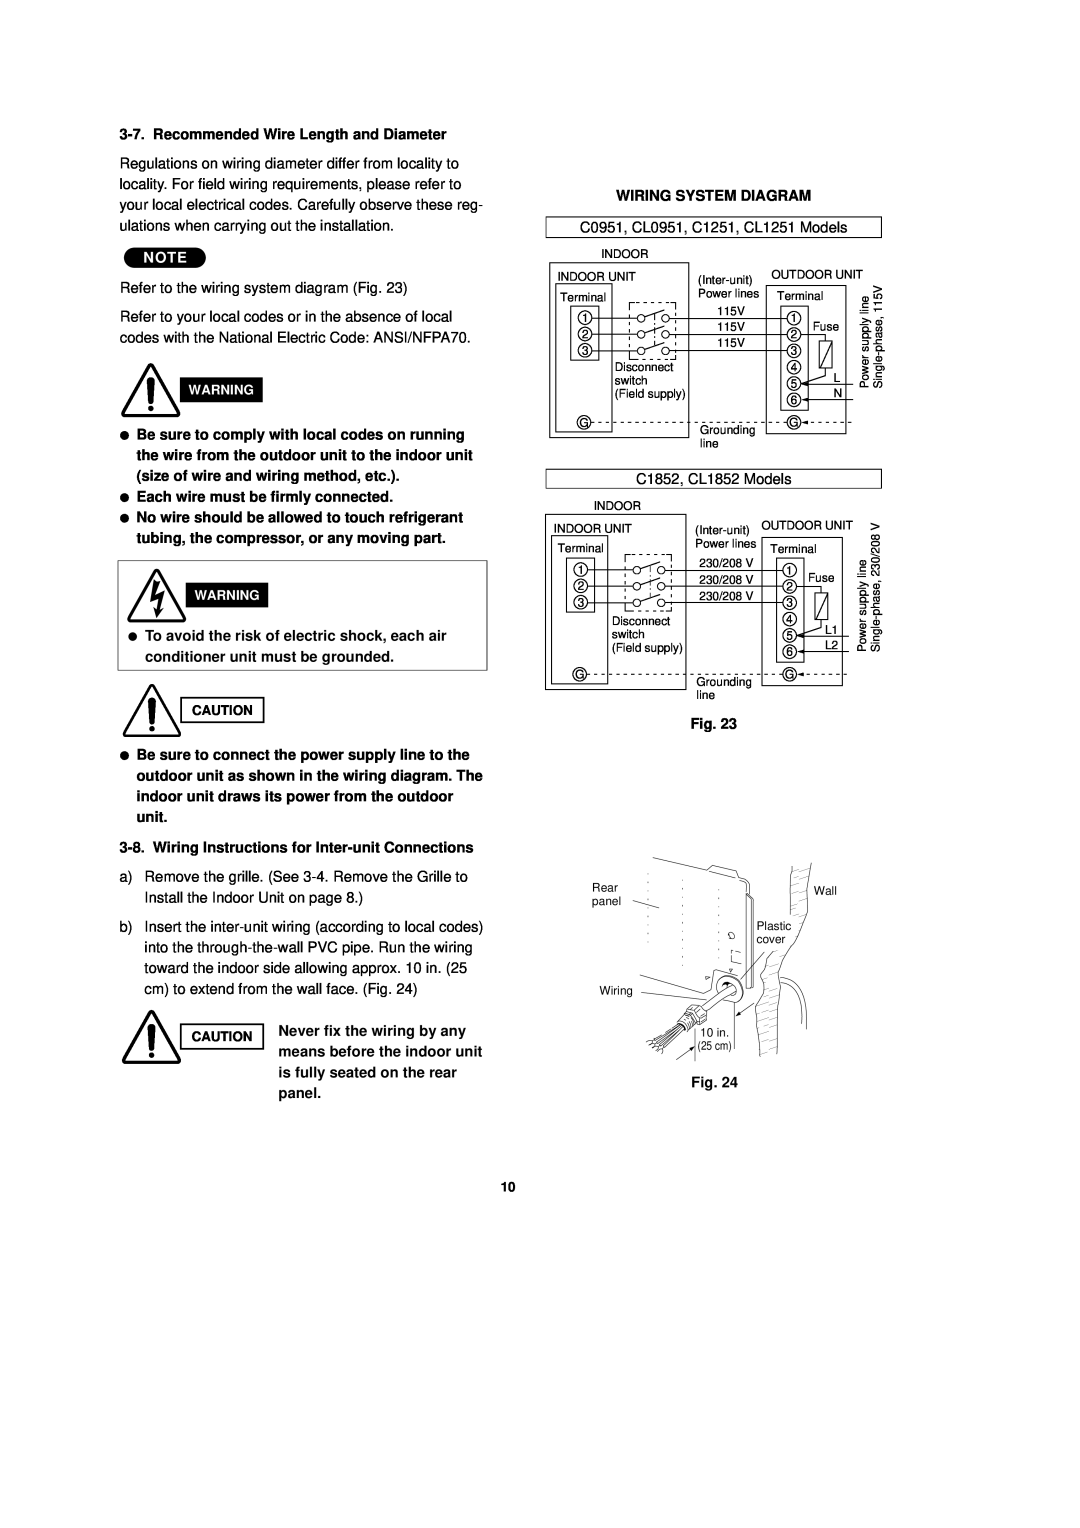 Sanyo CL1251 Recommended Wire Length and Diameter, Wiring System Diagram, Be sure to comply with local codes on running 